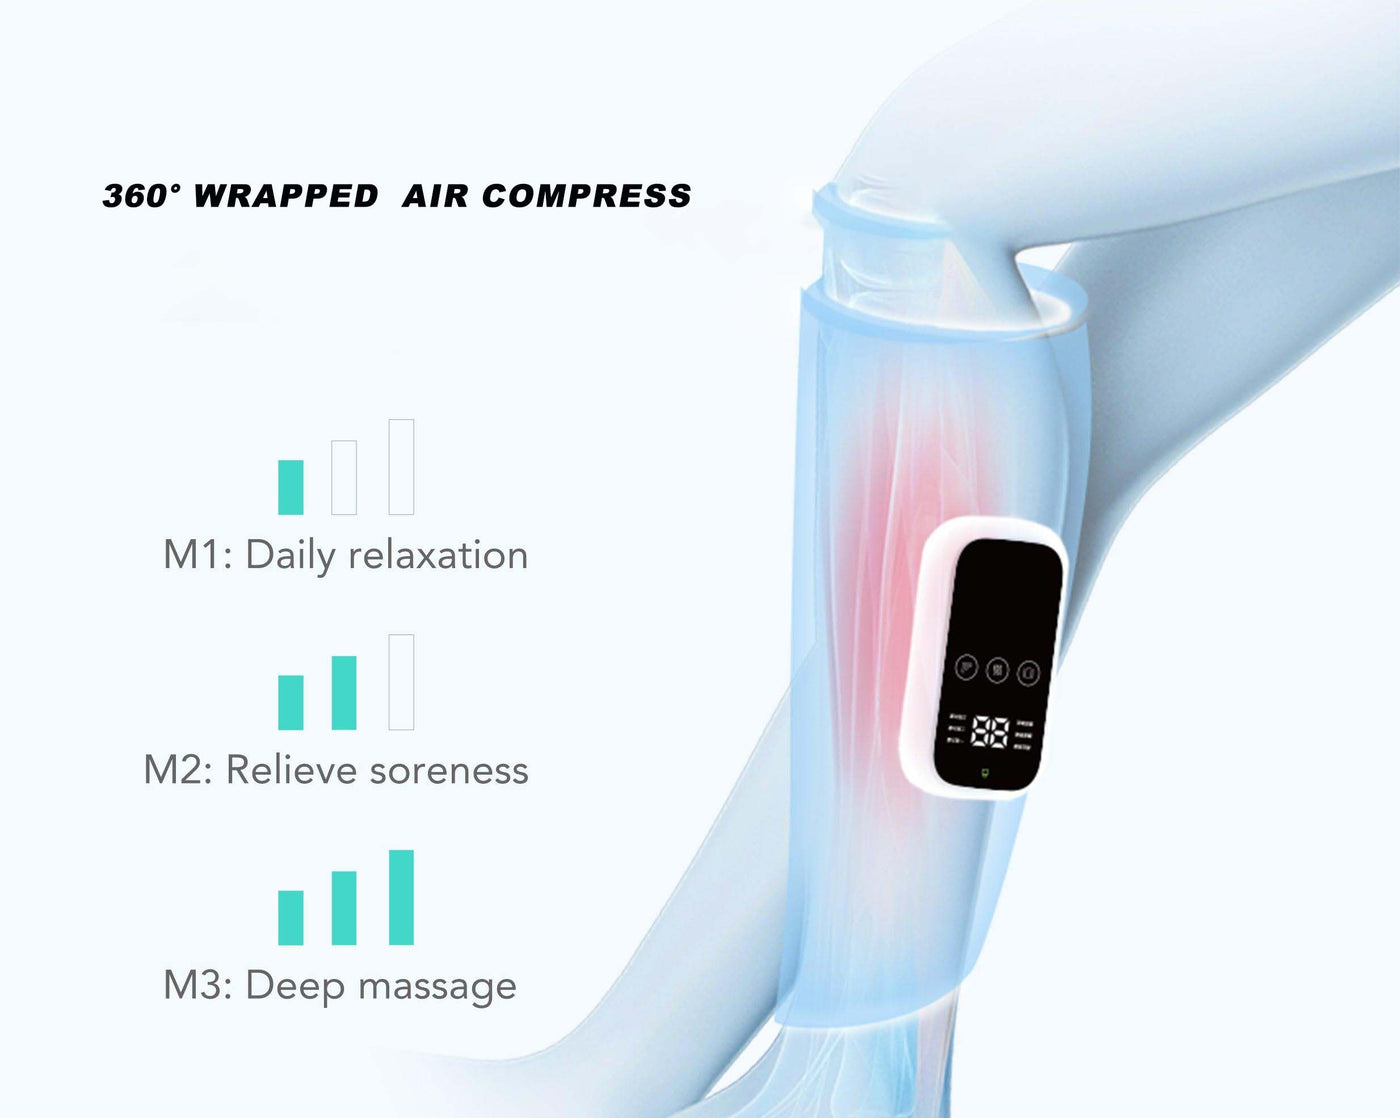 Rechargeable Leg Massager, Wireless Air Compression Calf Massager for Circulation and Muscles Relaxation One Pair